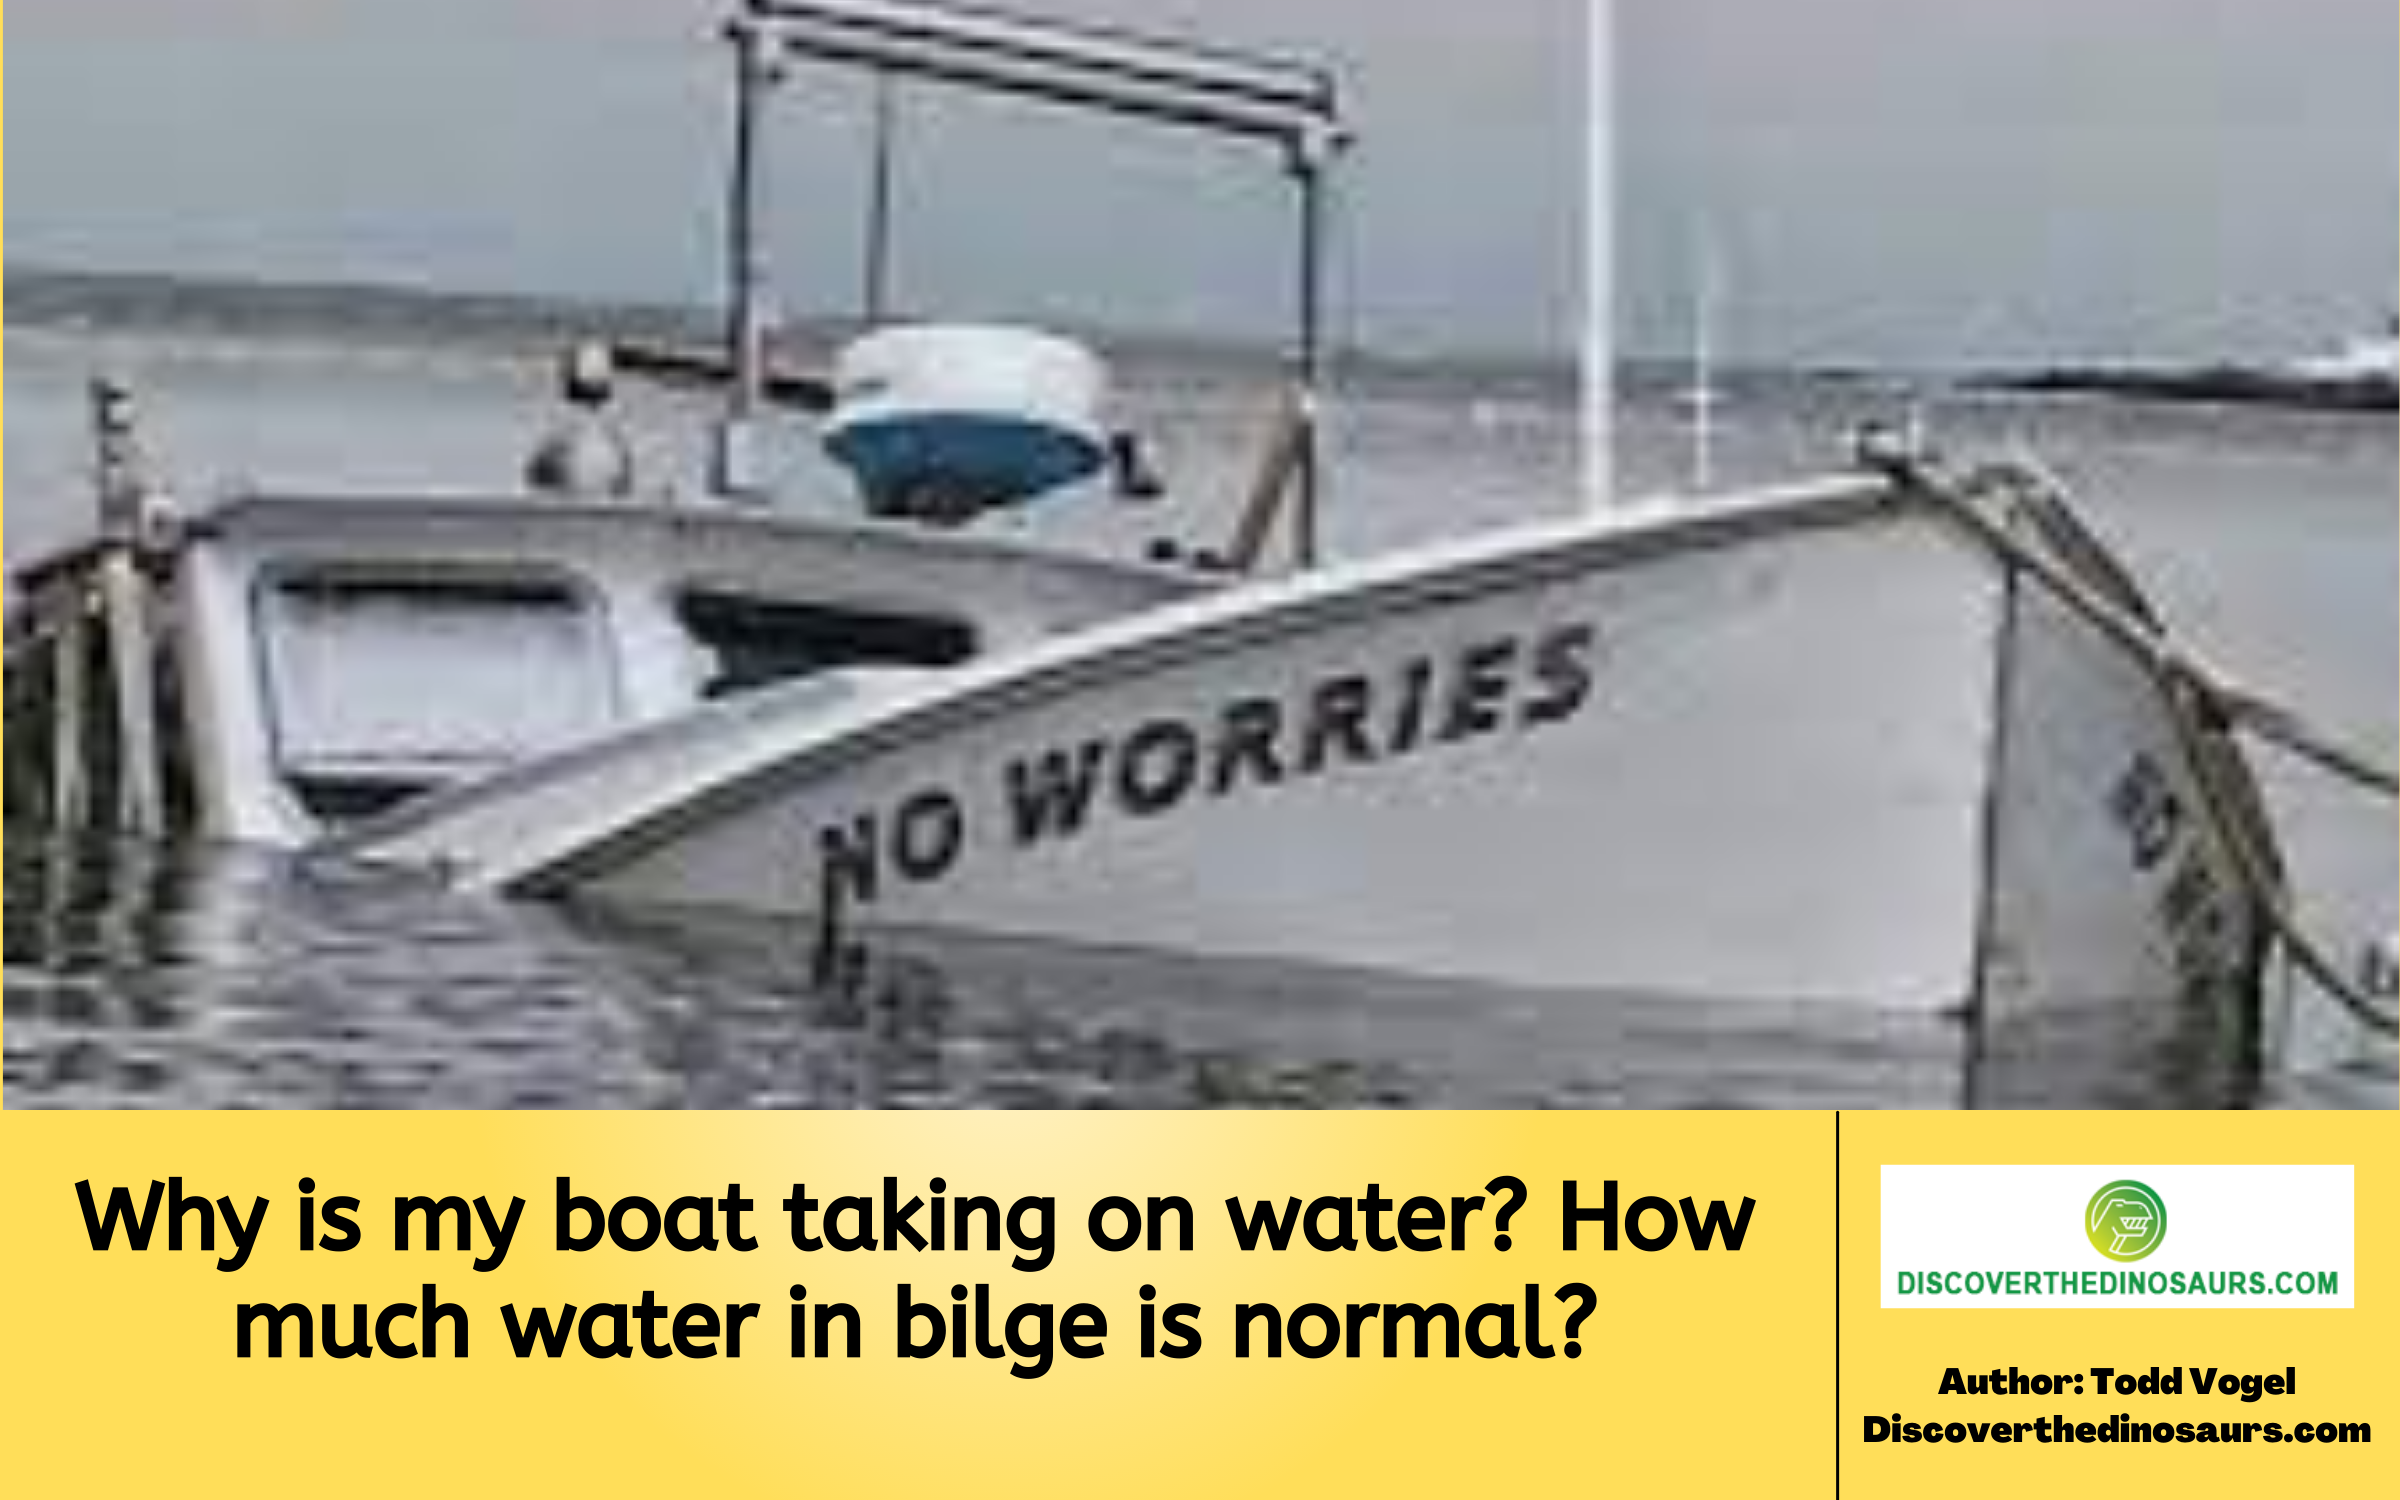 Why is my boat taking on water? How much water in bilge is normal?